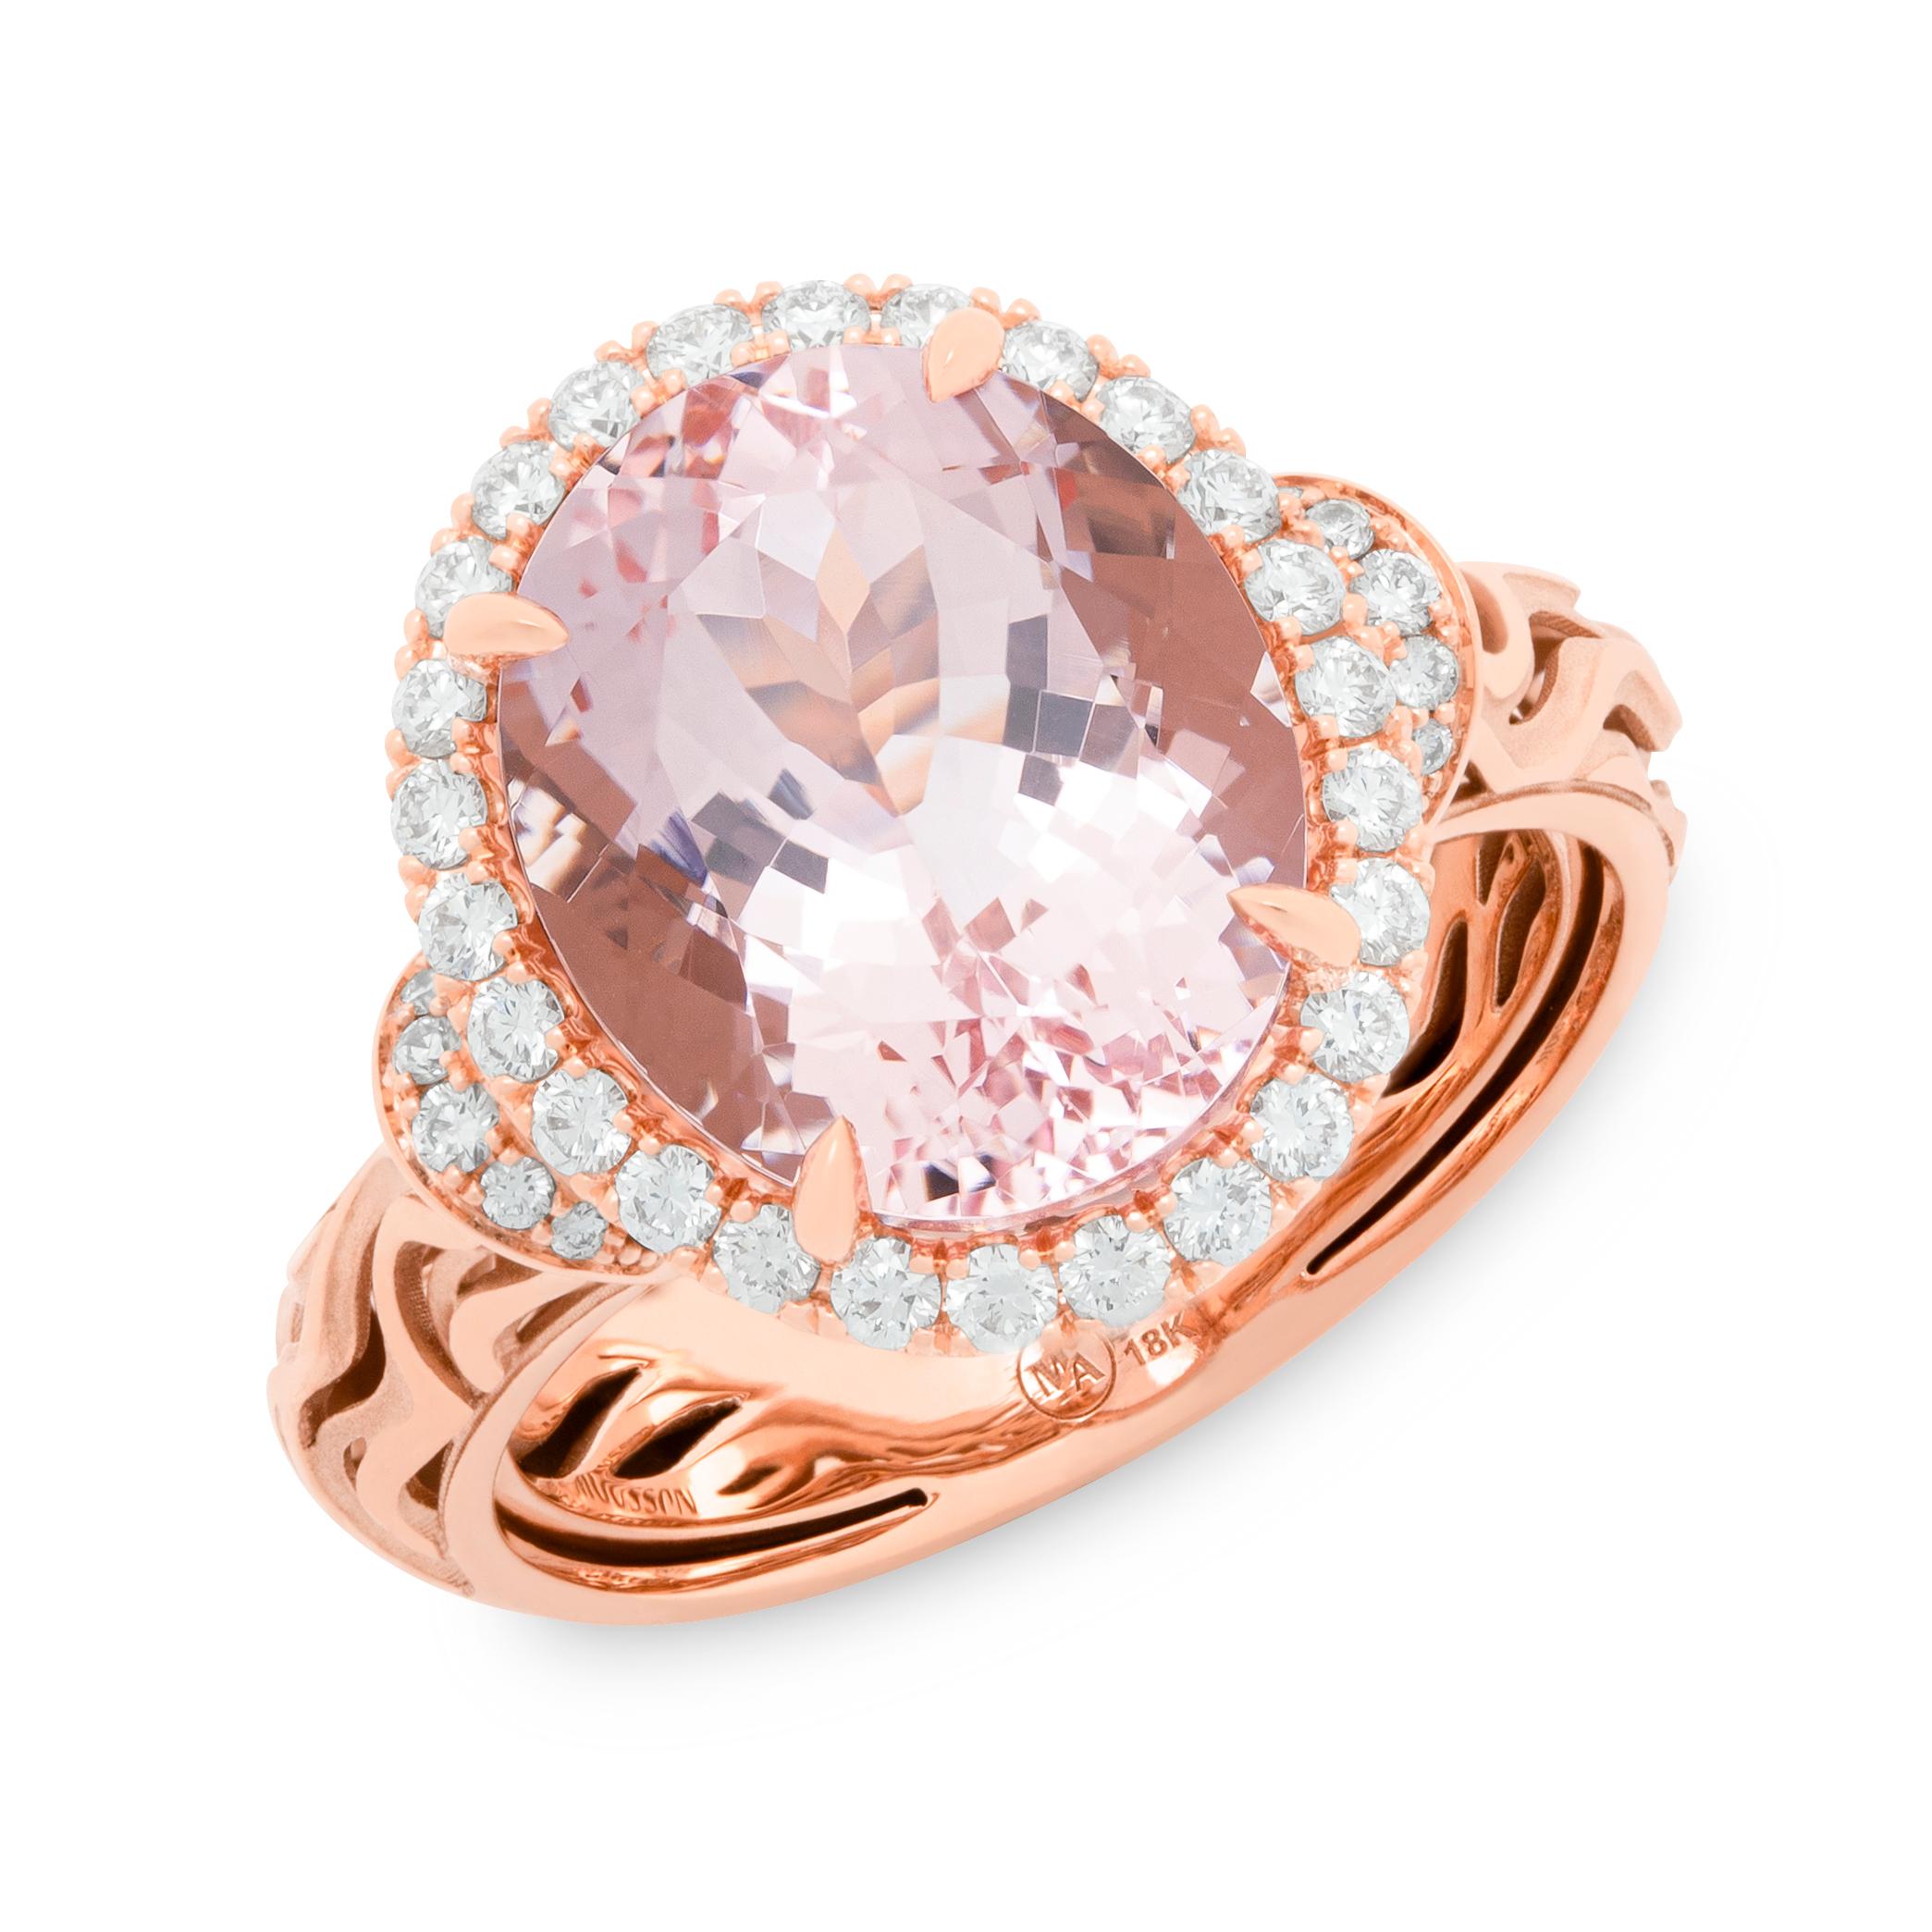 Morganites Diamonds 18 Karat Rose Gold New Classic Suite
We have published a series of new Rings and Earrings with the same idea but with different details. Introducing a Suite crafted from 18 Karat Rose Gold, which in company with Morganite and